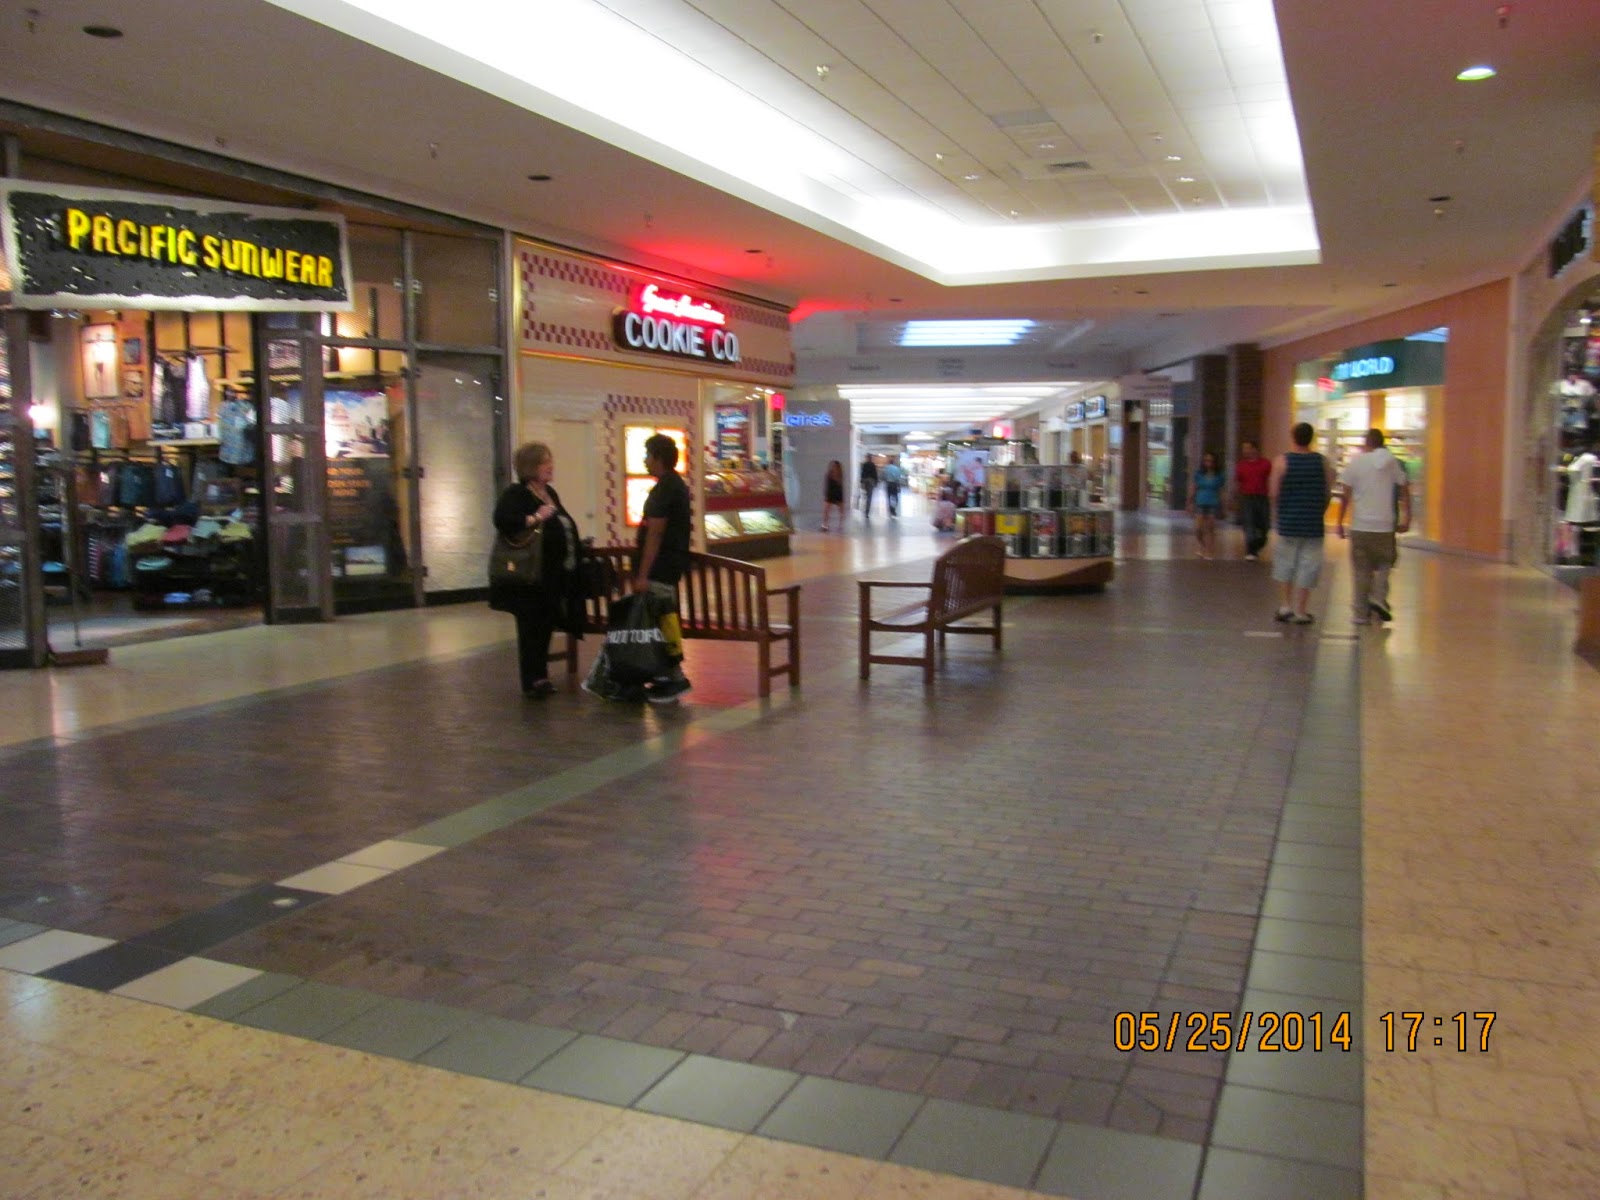 NorthPark Mall Davenport, Iowa. There were some people here